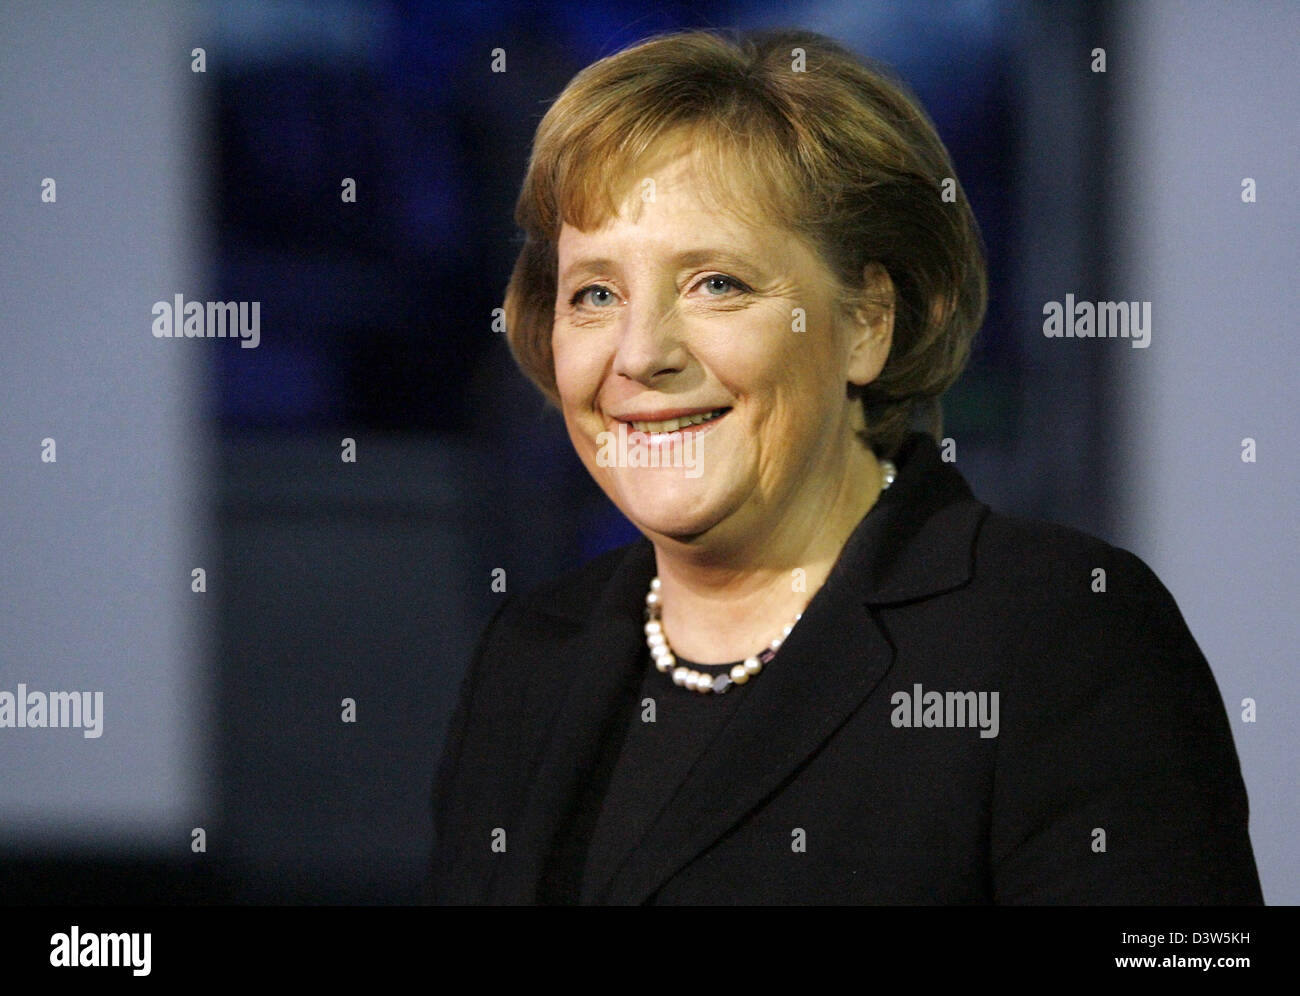 German Chancellor Angela Merkel smiles after giving a statement on the execution of former Iraqi dictator Saddam Hussein in Berlin, Germany, Saturday, 30 December 2006. Merkel renewed her rejection of death penalty but said her thoughts were with the innocent victims of Hussein. Photo: Axel Schmidt Stock Photo